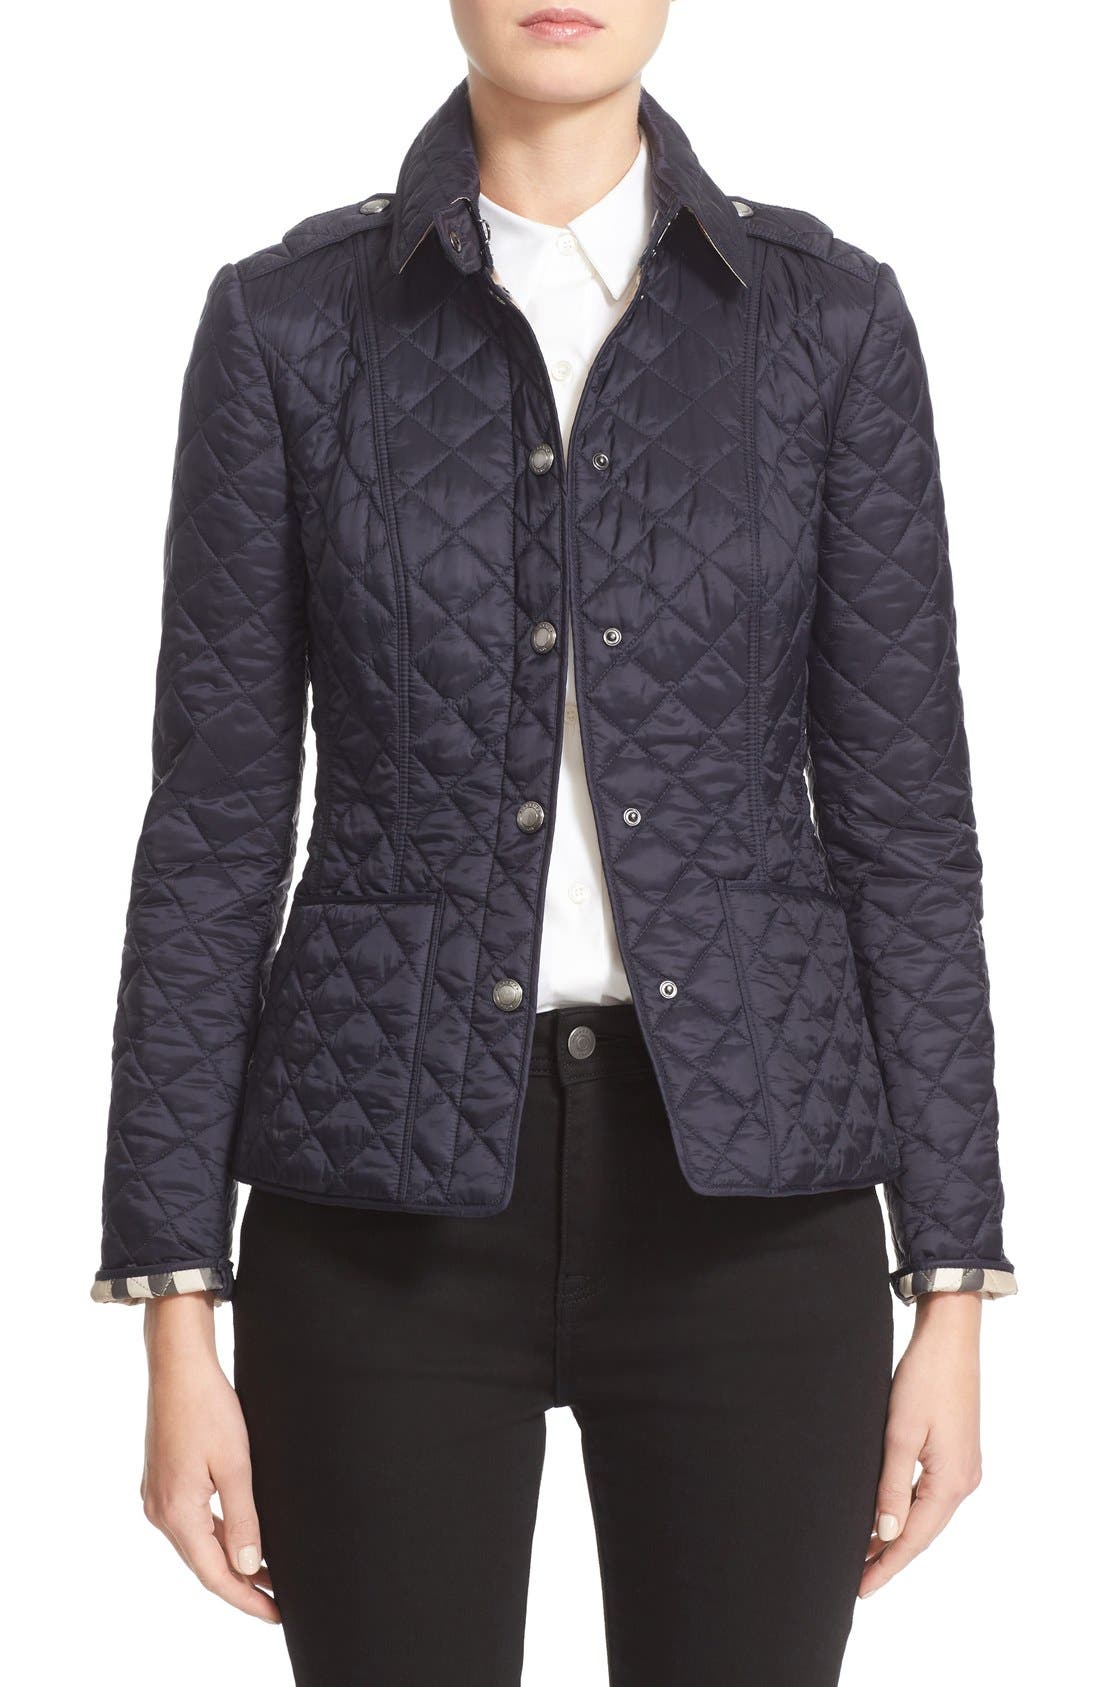 burberry kencott heritage quilted jacket